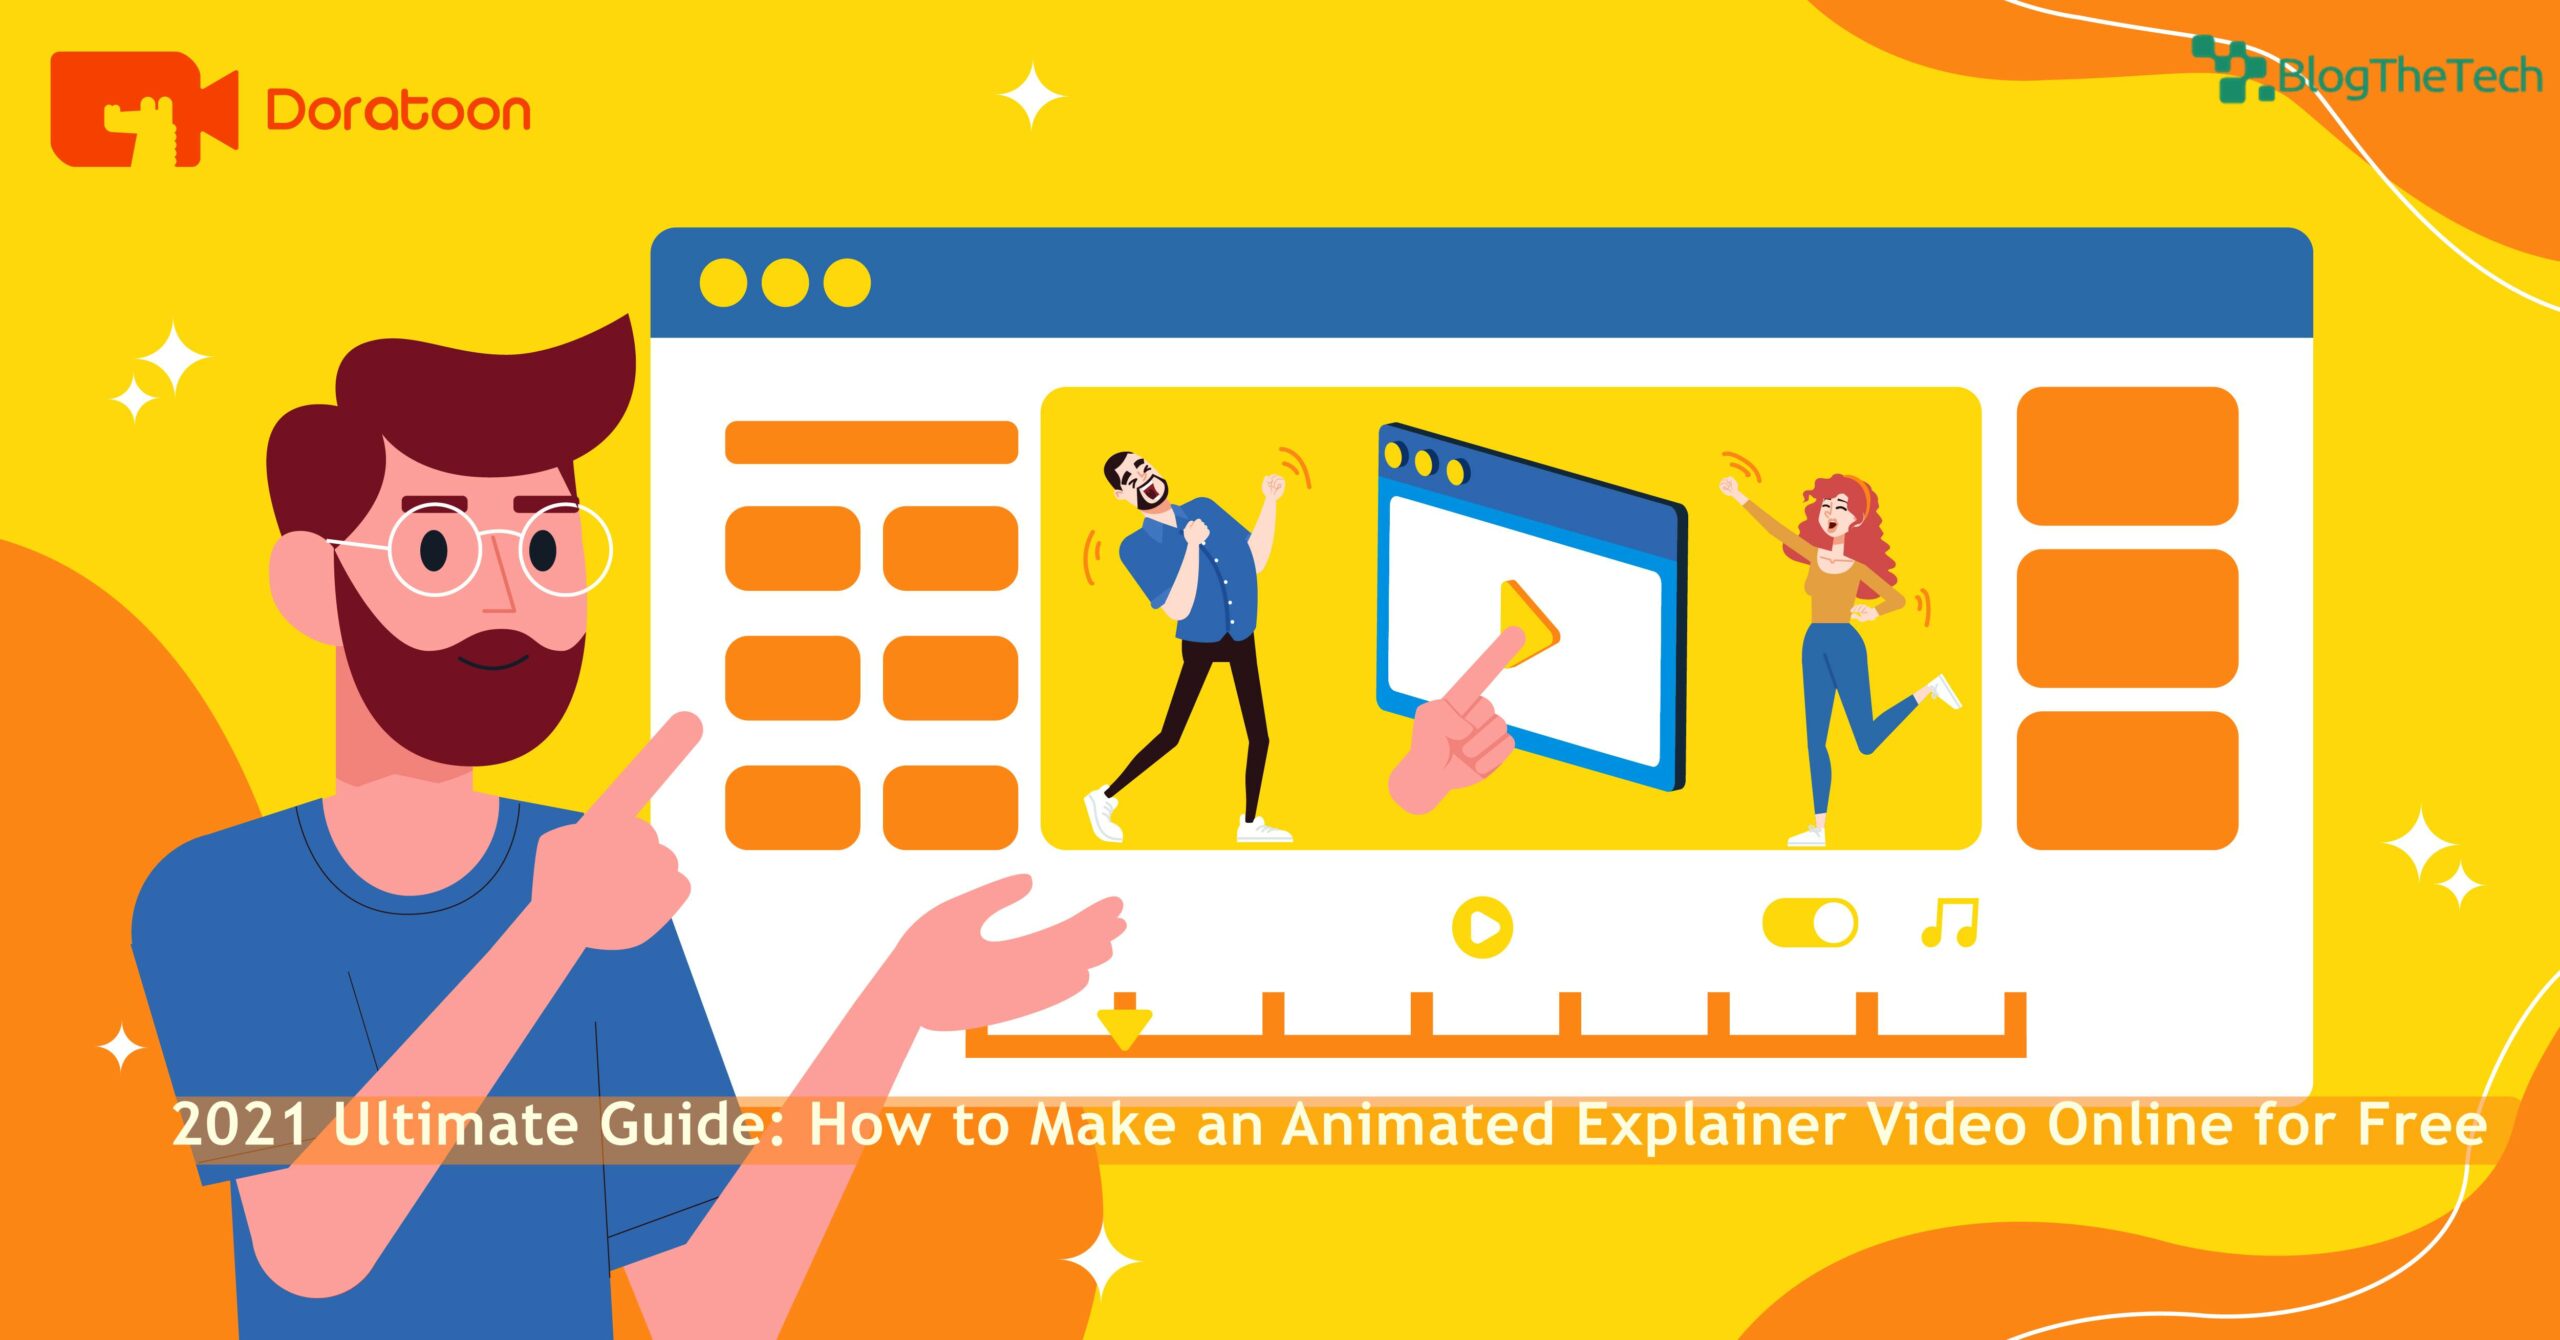 2021 Ultimate Guide: How to Make an Animated Explainer Video Online for Free